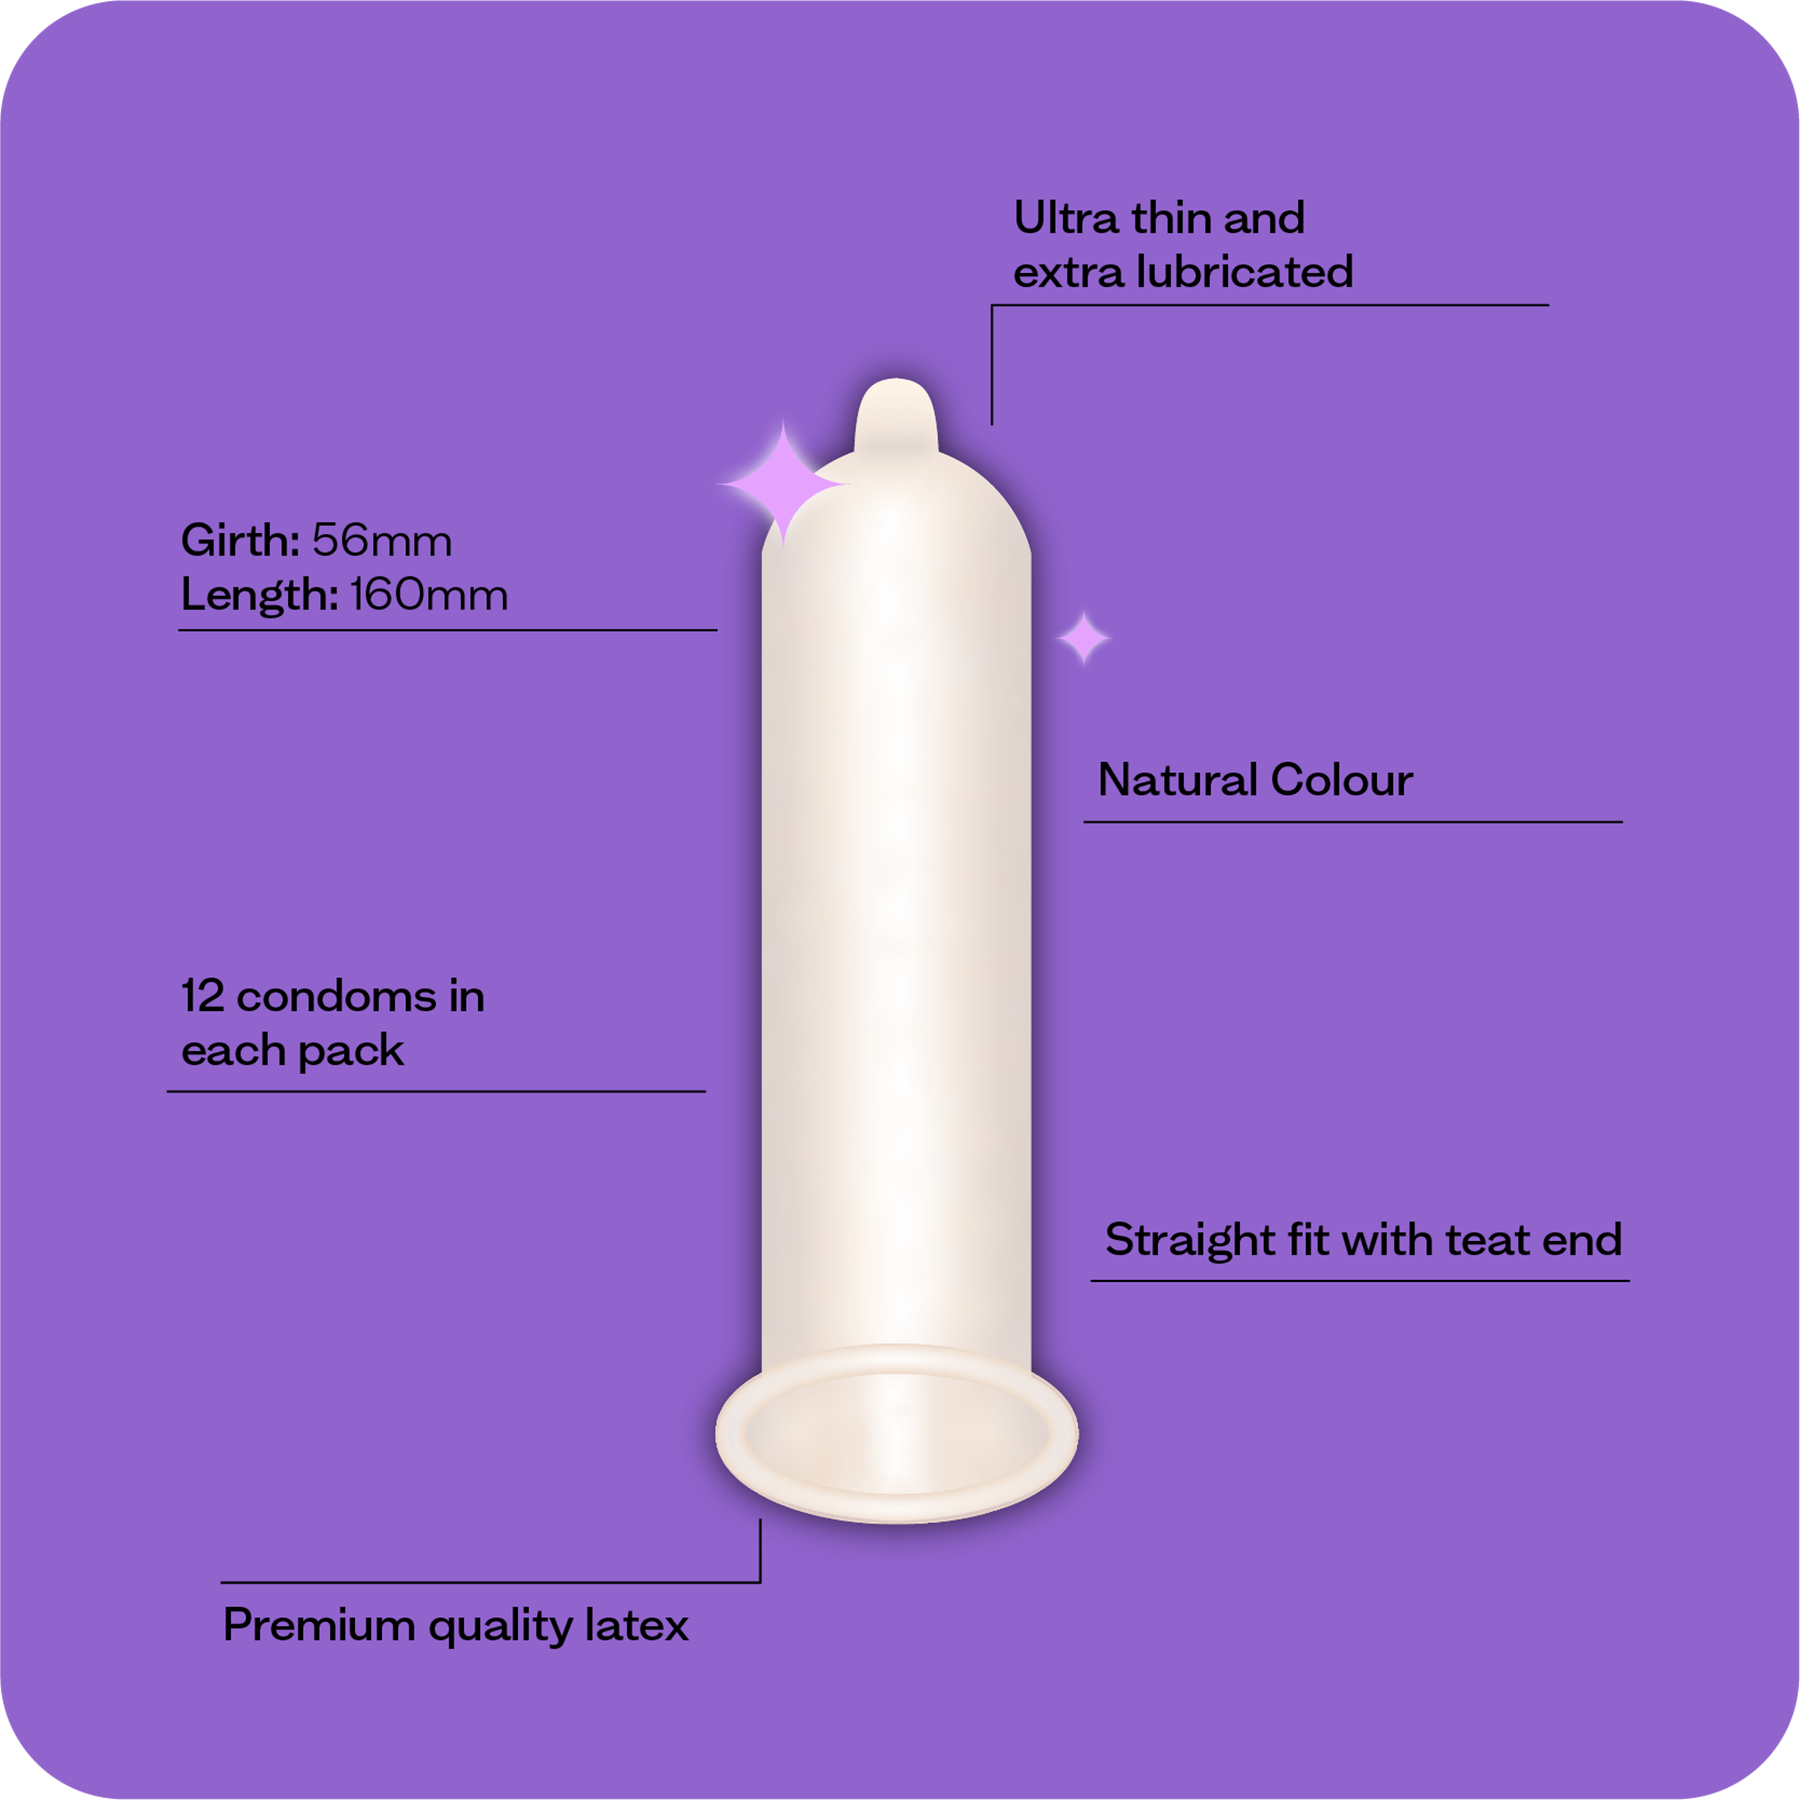 Illustration of Moments Ultra Thin Large condom highlighting its features